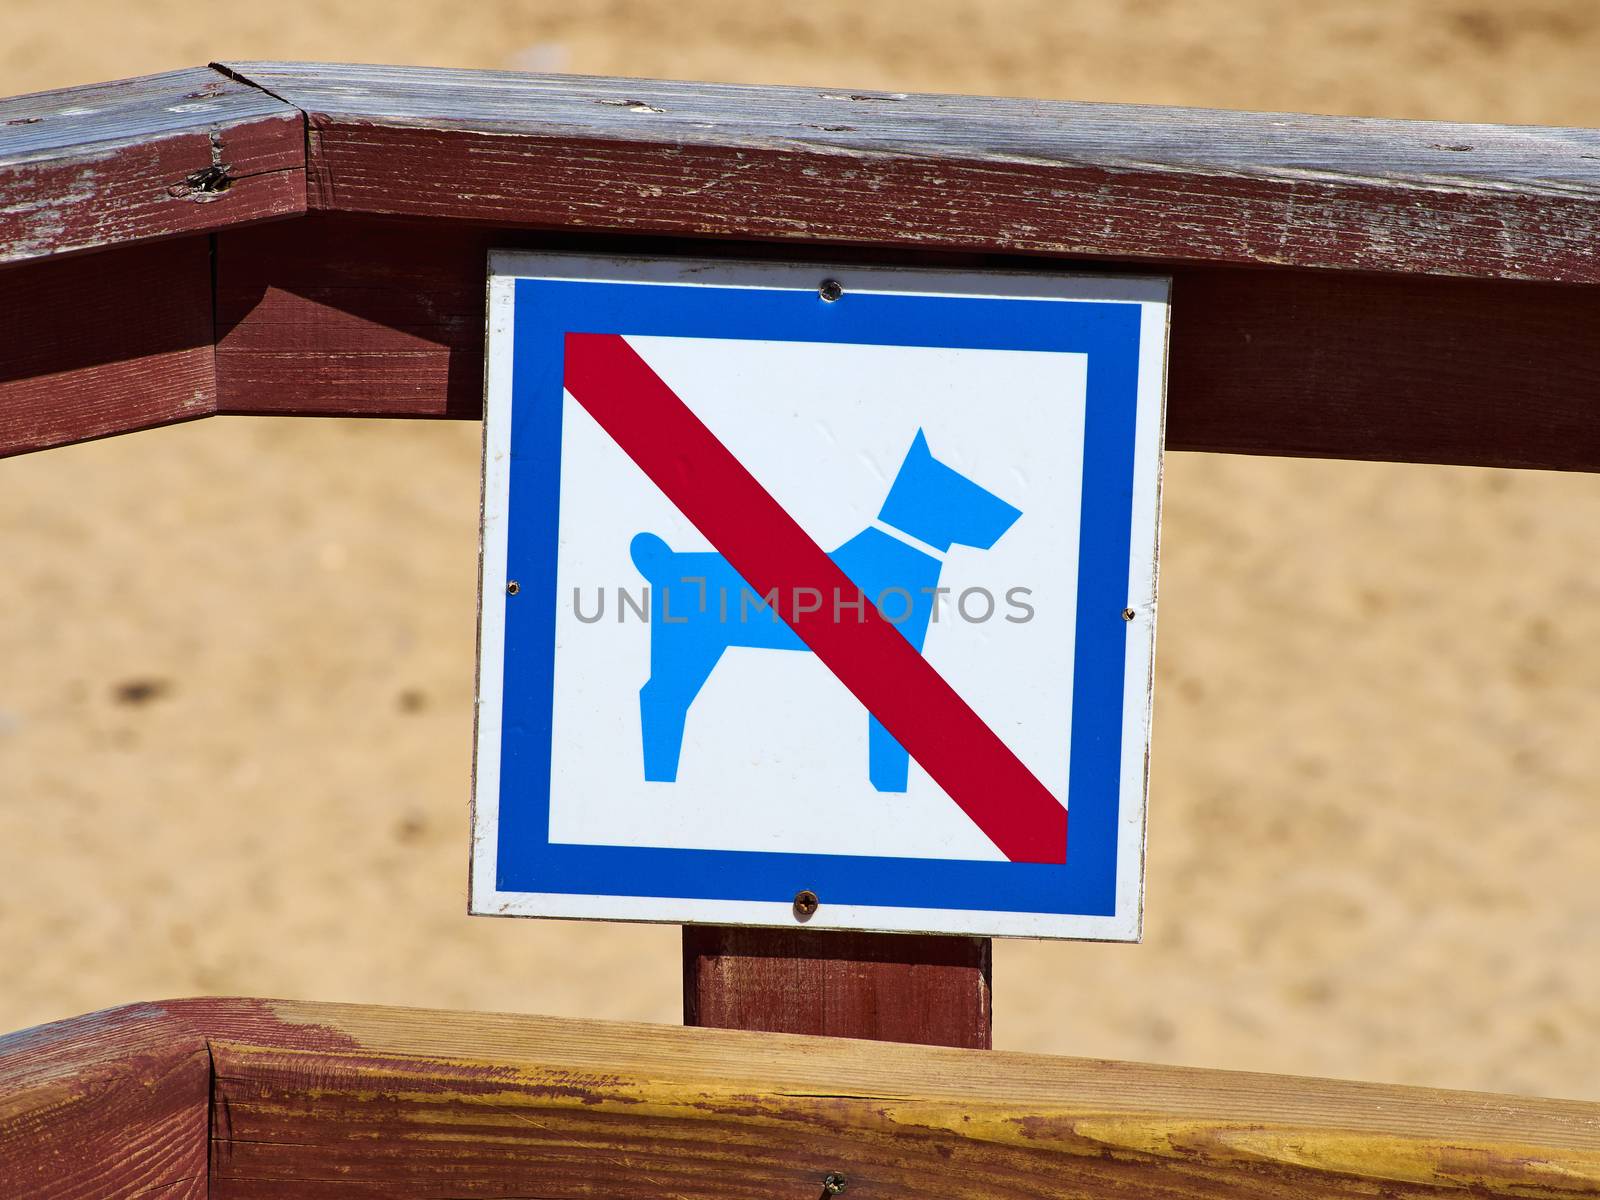 No dog zone sign  by Ronyzmbow